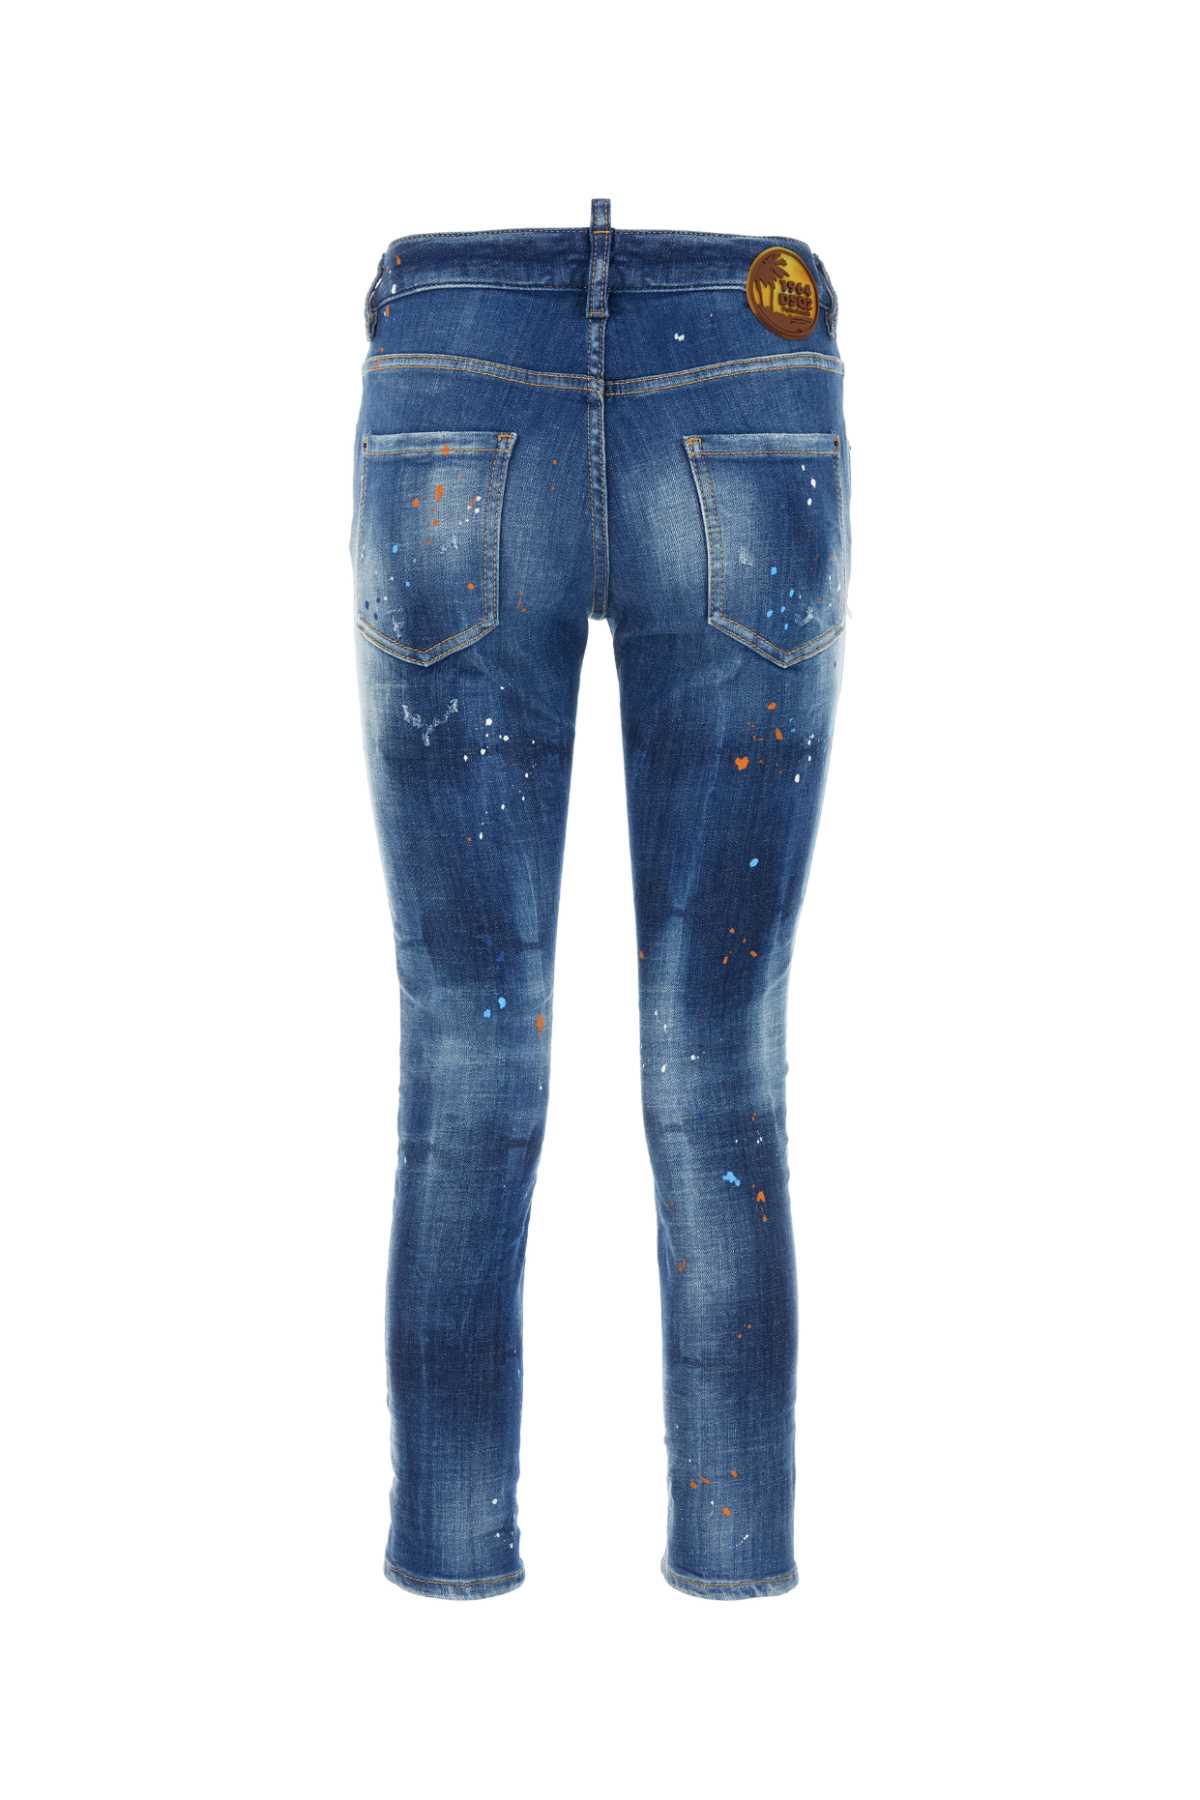 Dsquared2 Stretch Denim Cool Girl Jeans In Navyblue